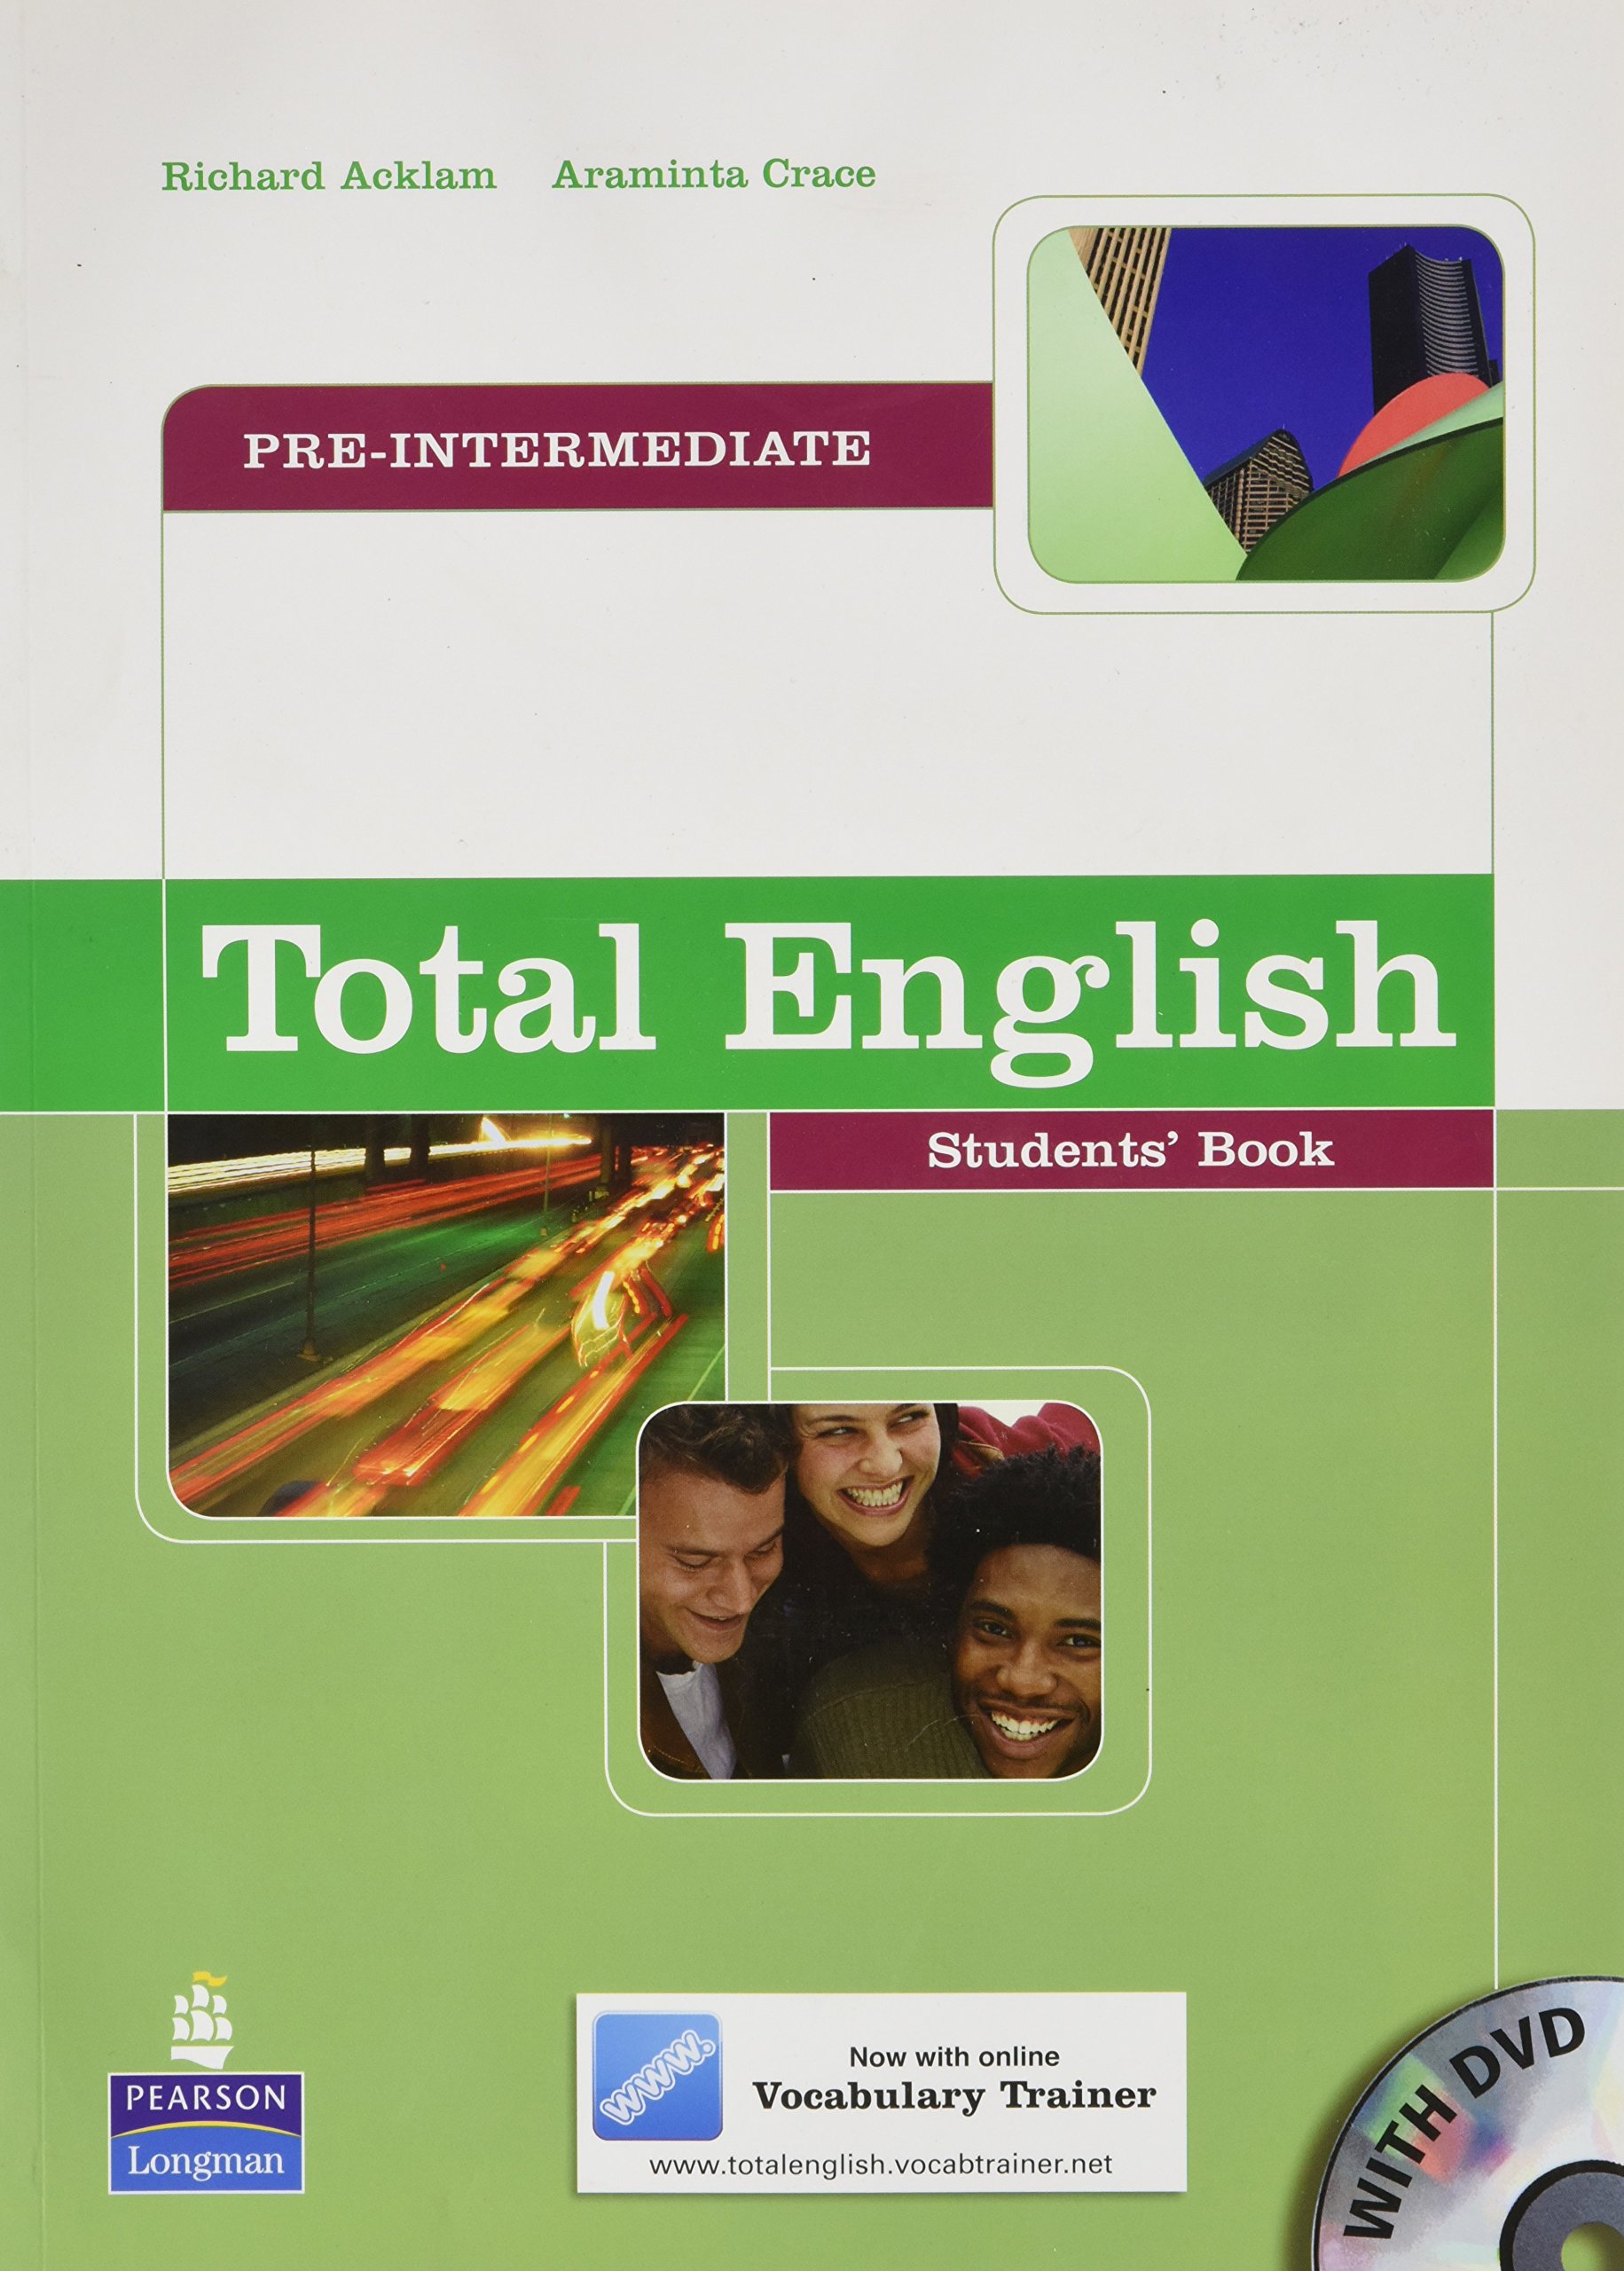 New total english students book. Total English Intermediate student's book ответы 2011. Total English Intermediate student's book Автор. Пособия Pearson total English. Учебник pre Intermediate total English.